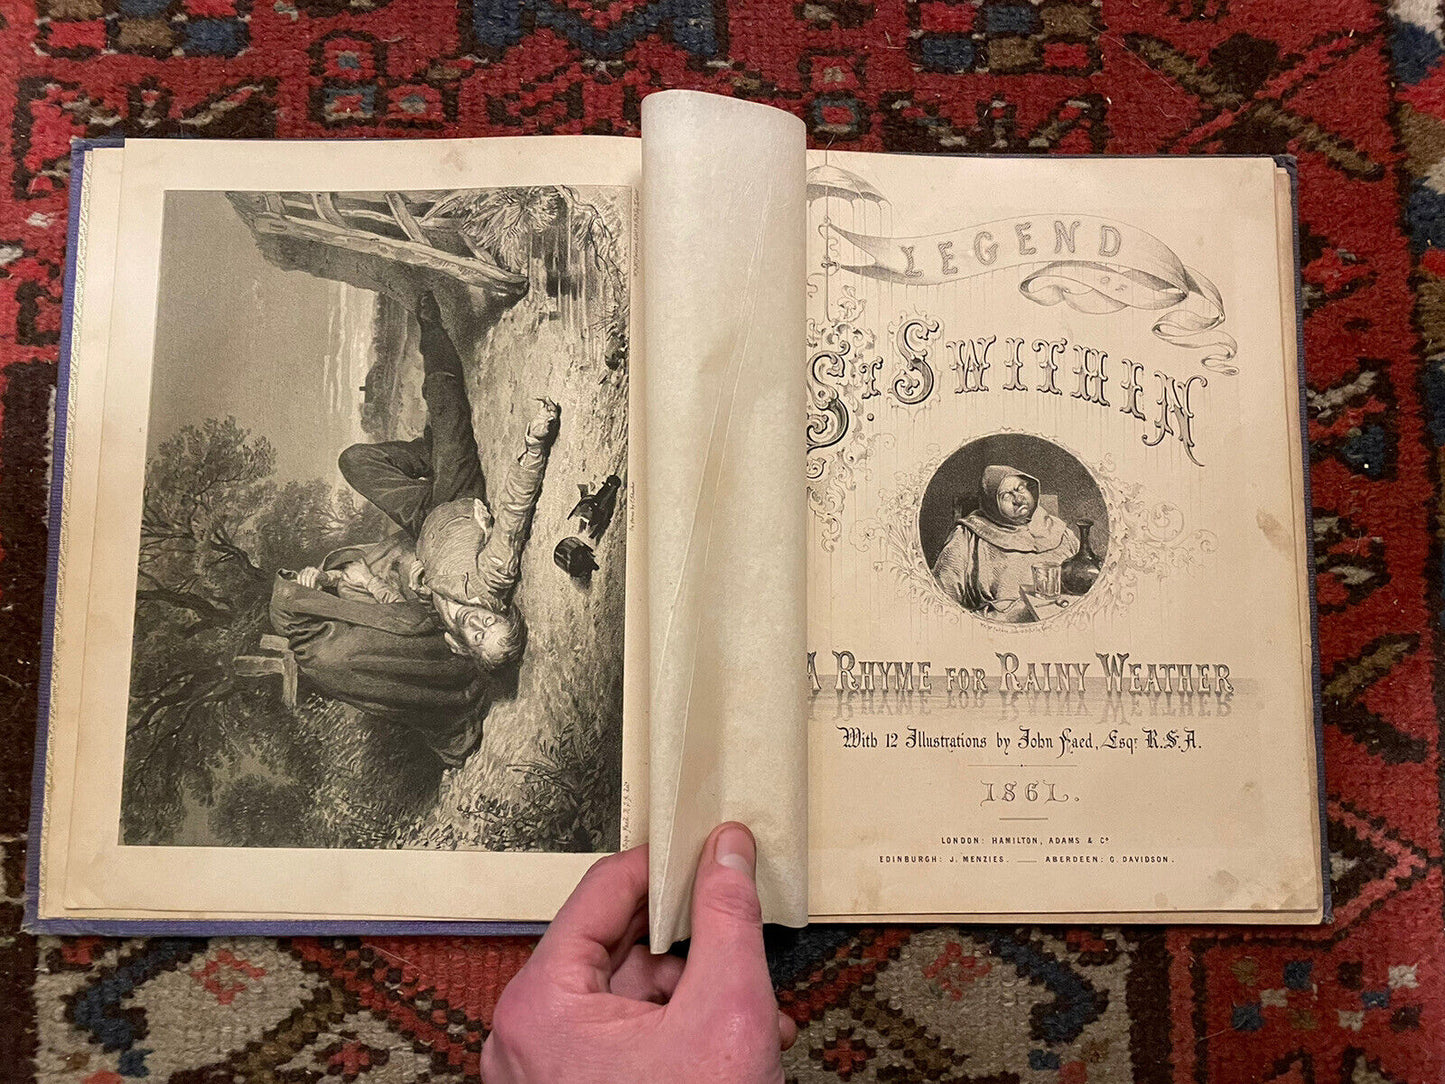 Legend of St Swithin : A Rhyme For Rainy Weather:  Illustrated by John Faed 1861